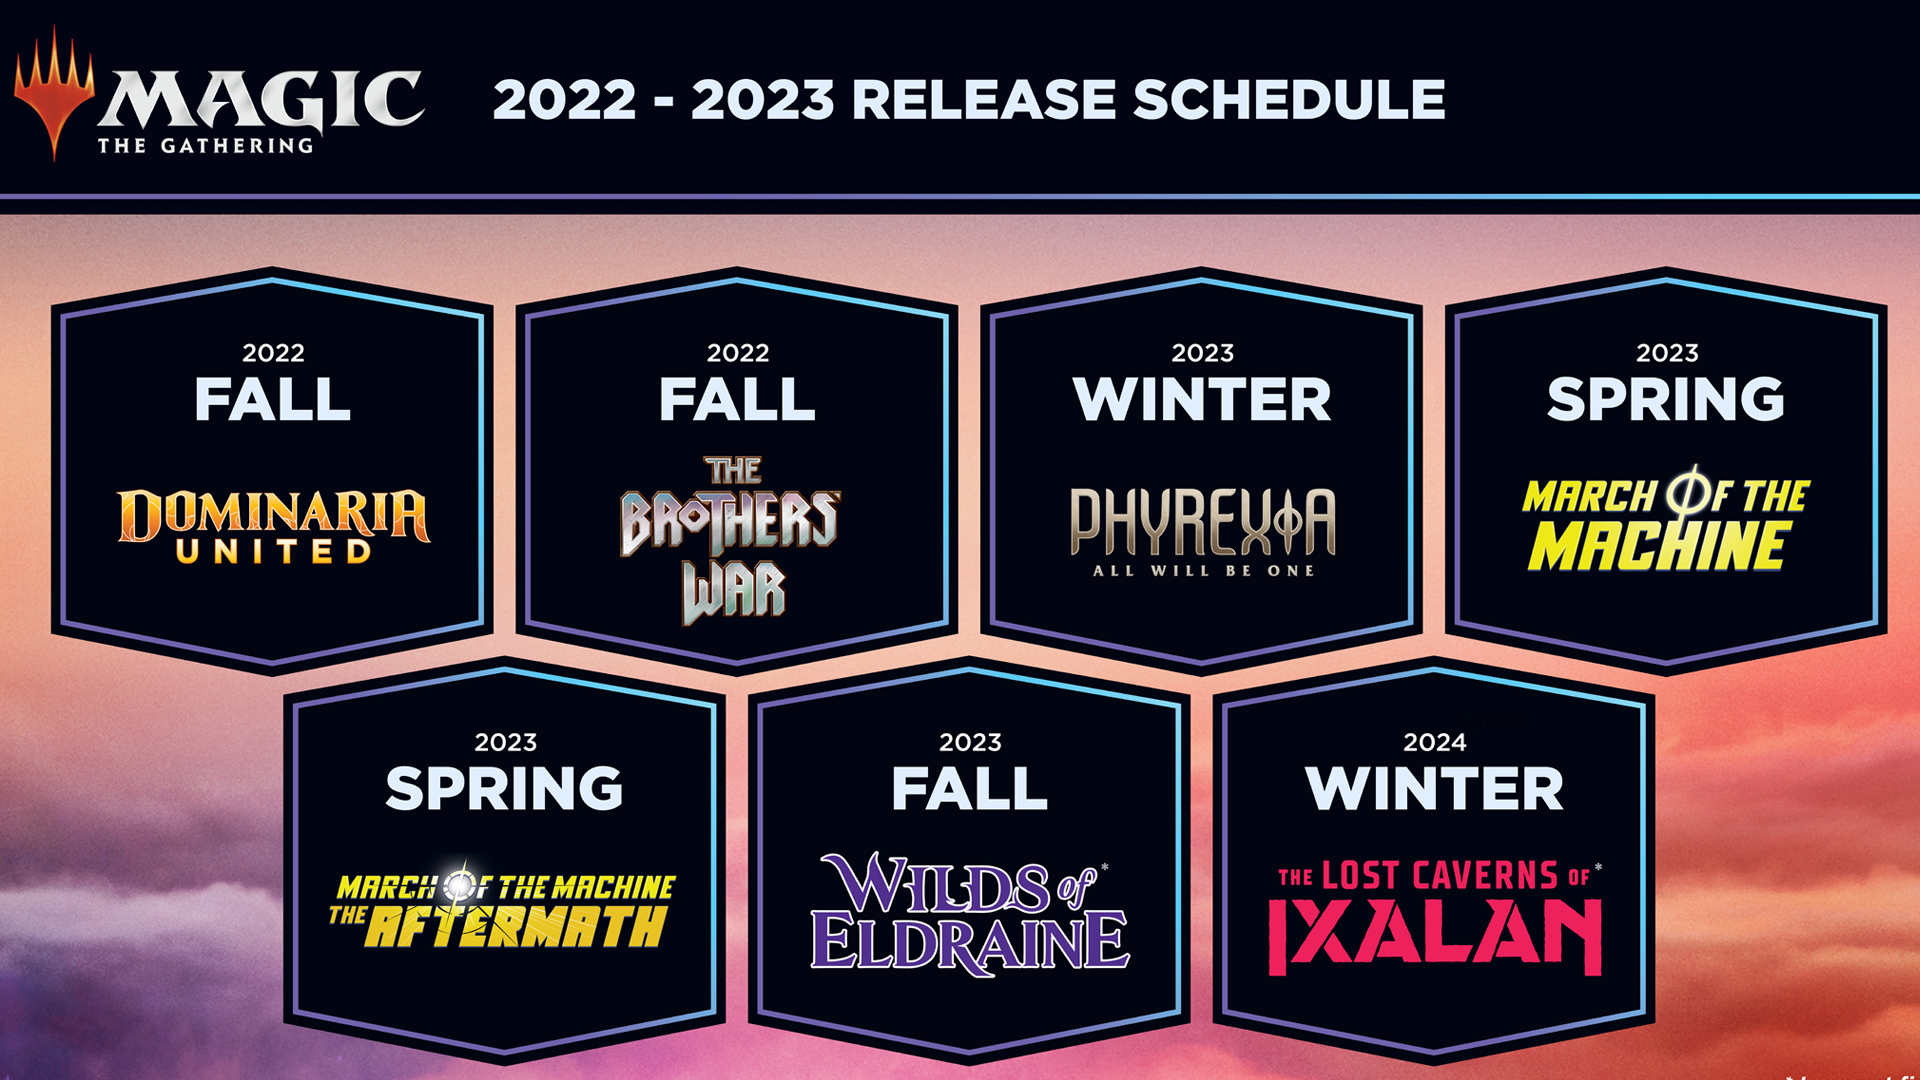 An image of the upcoming schedule for Magic: The Gathering from the Wizards Presents 2022 event.